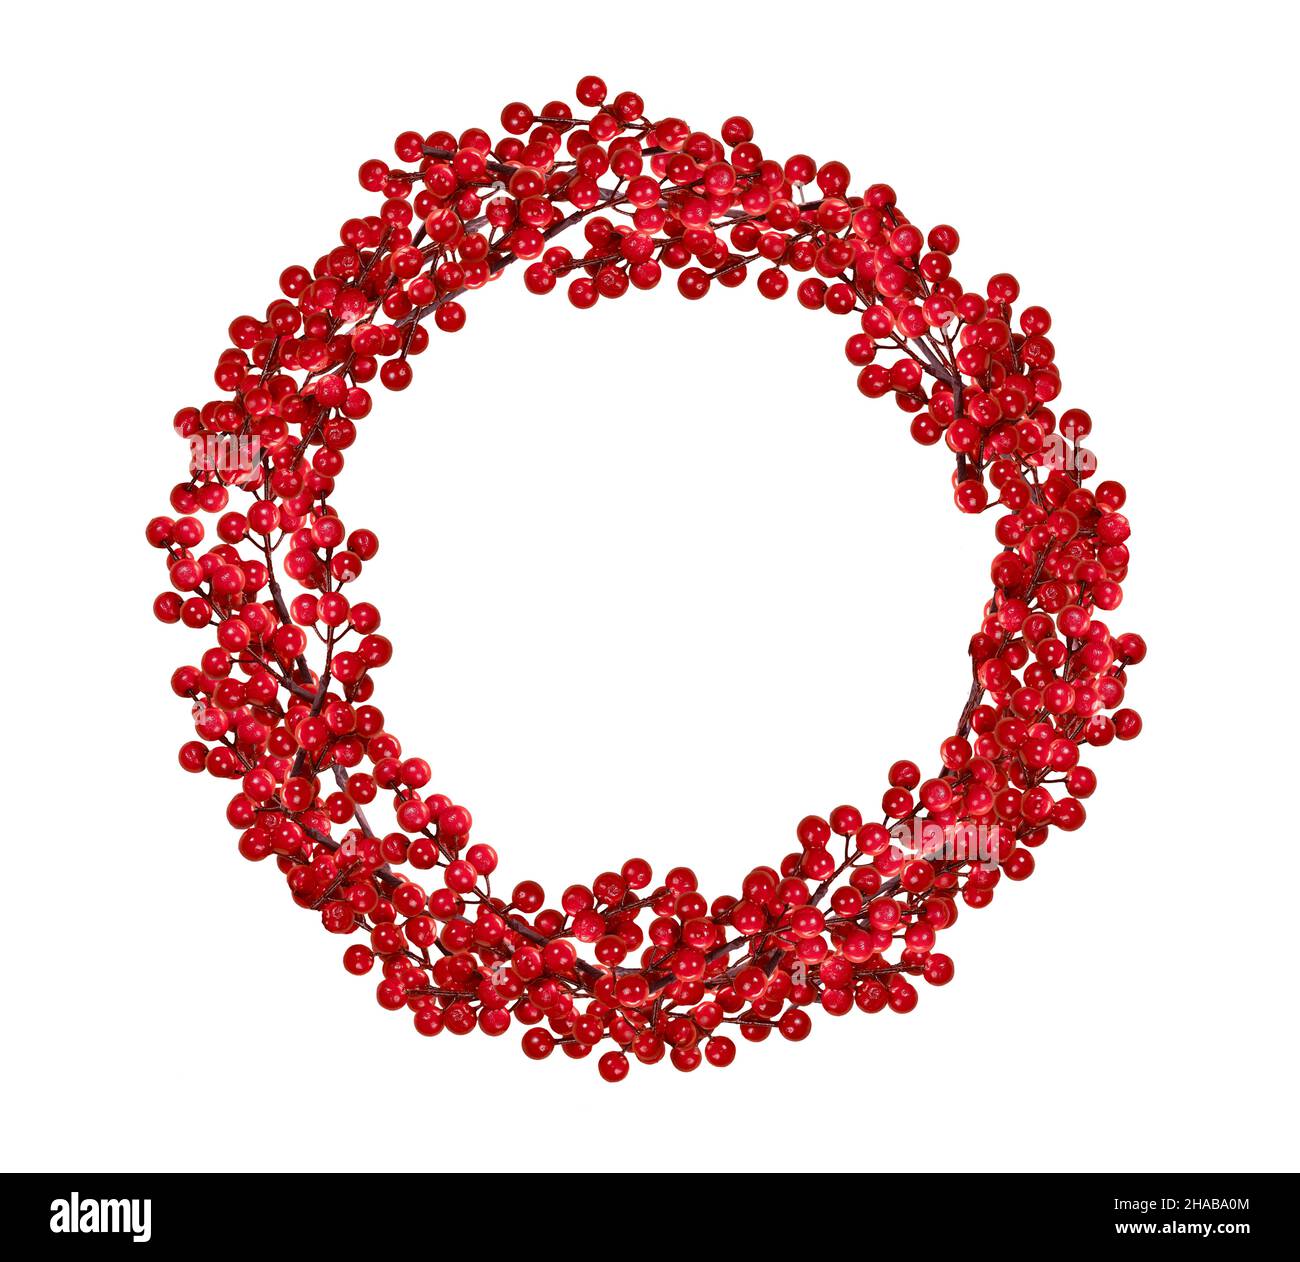 Red berry wreath isolated on white background. Xmas holiday decor. Door ornament. Stock Photo